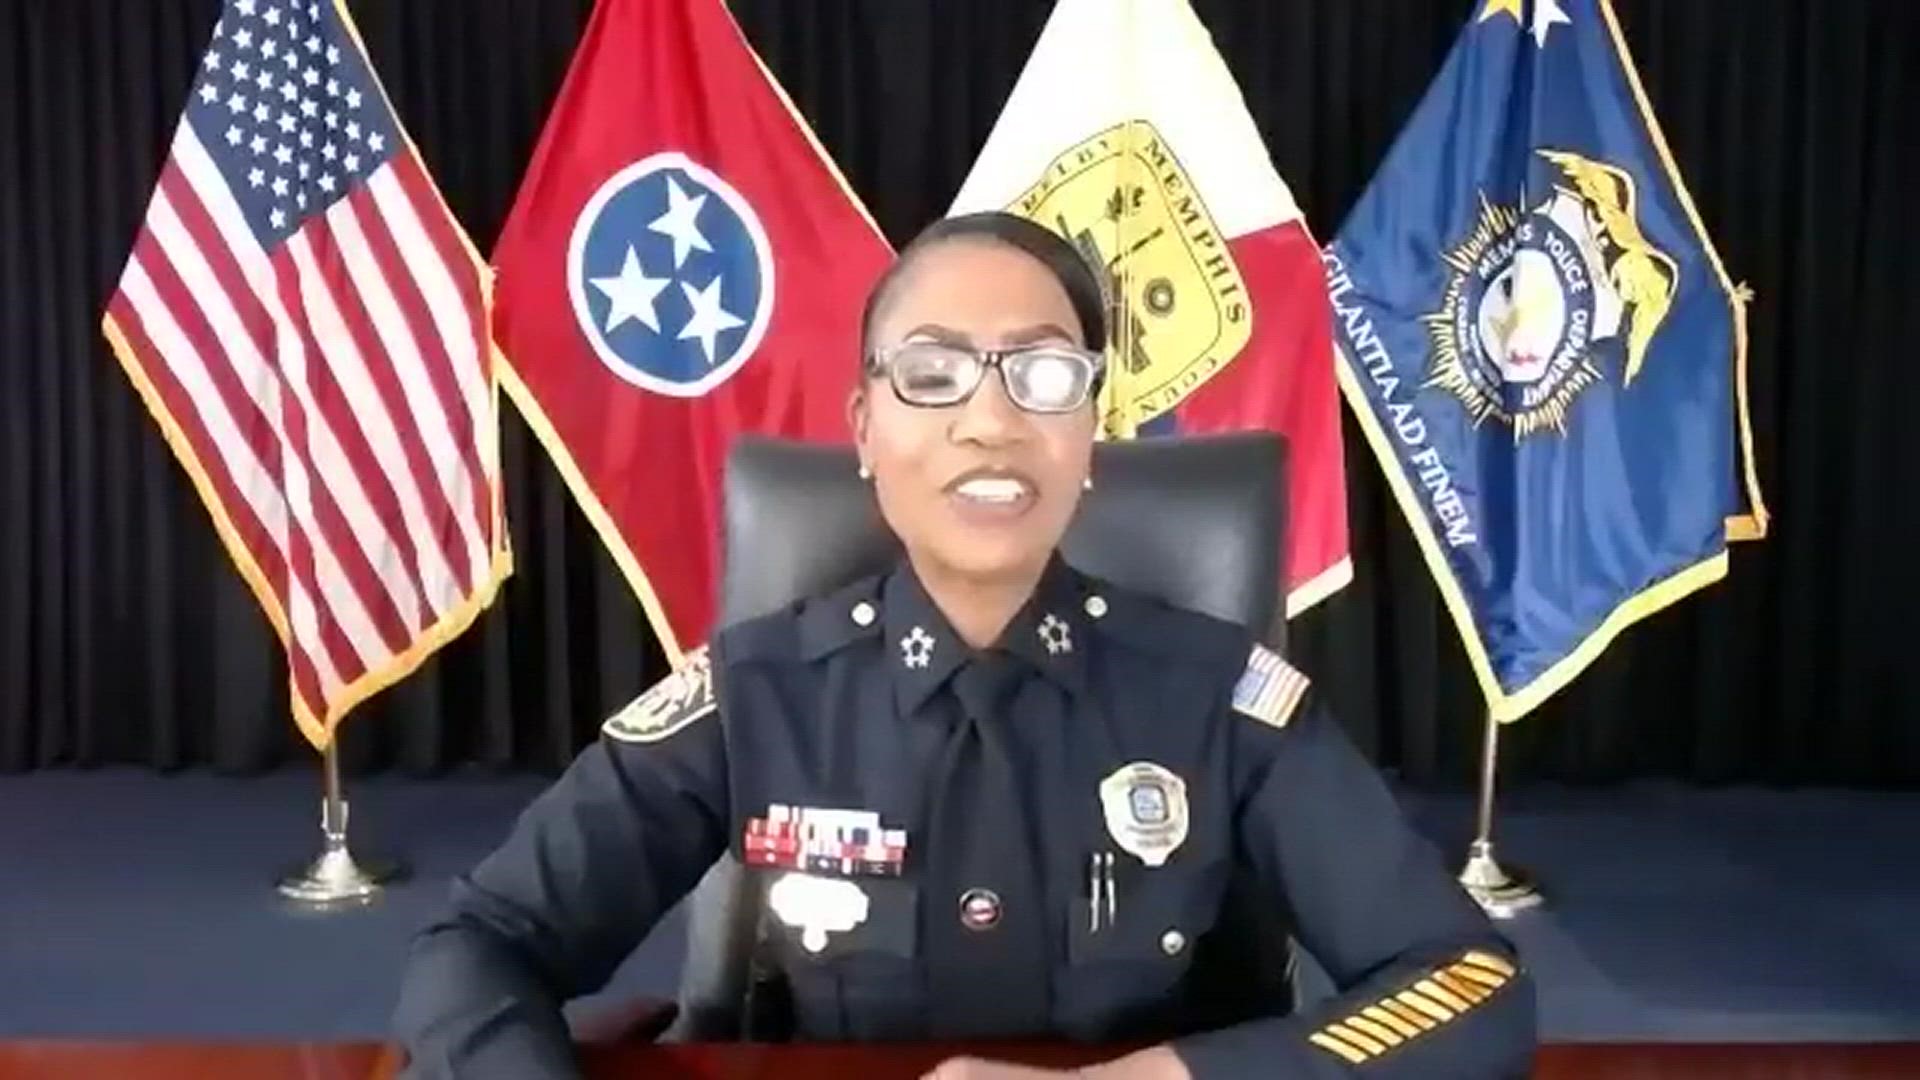 Chief Davis met virtually with media representatives in Memphis to answer questions about her future plans for the department and to share her policing strategies.